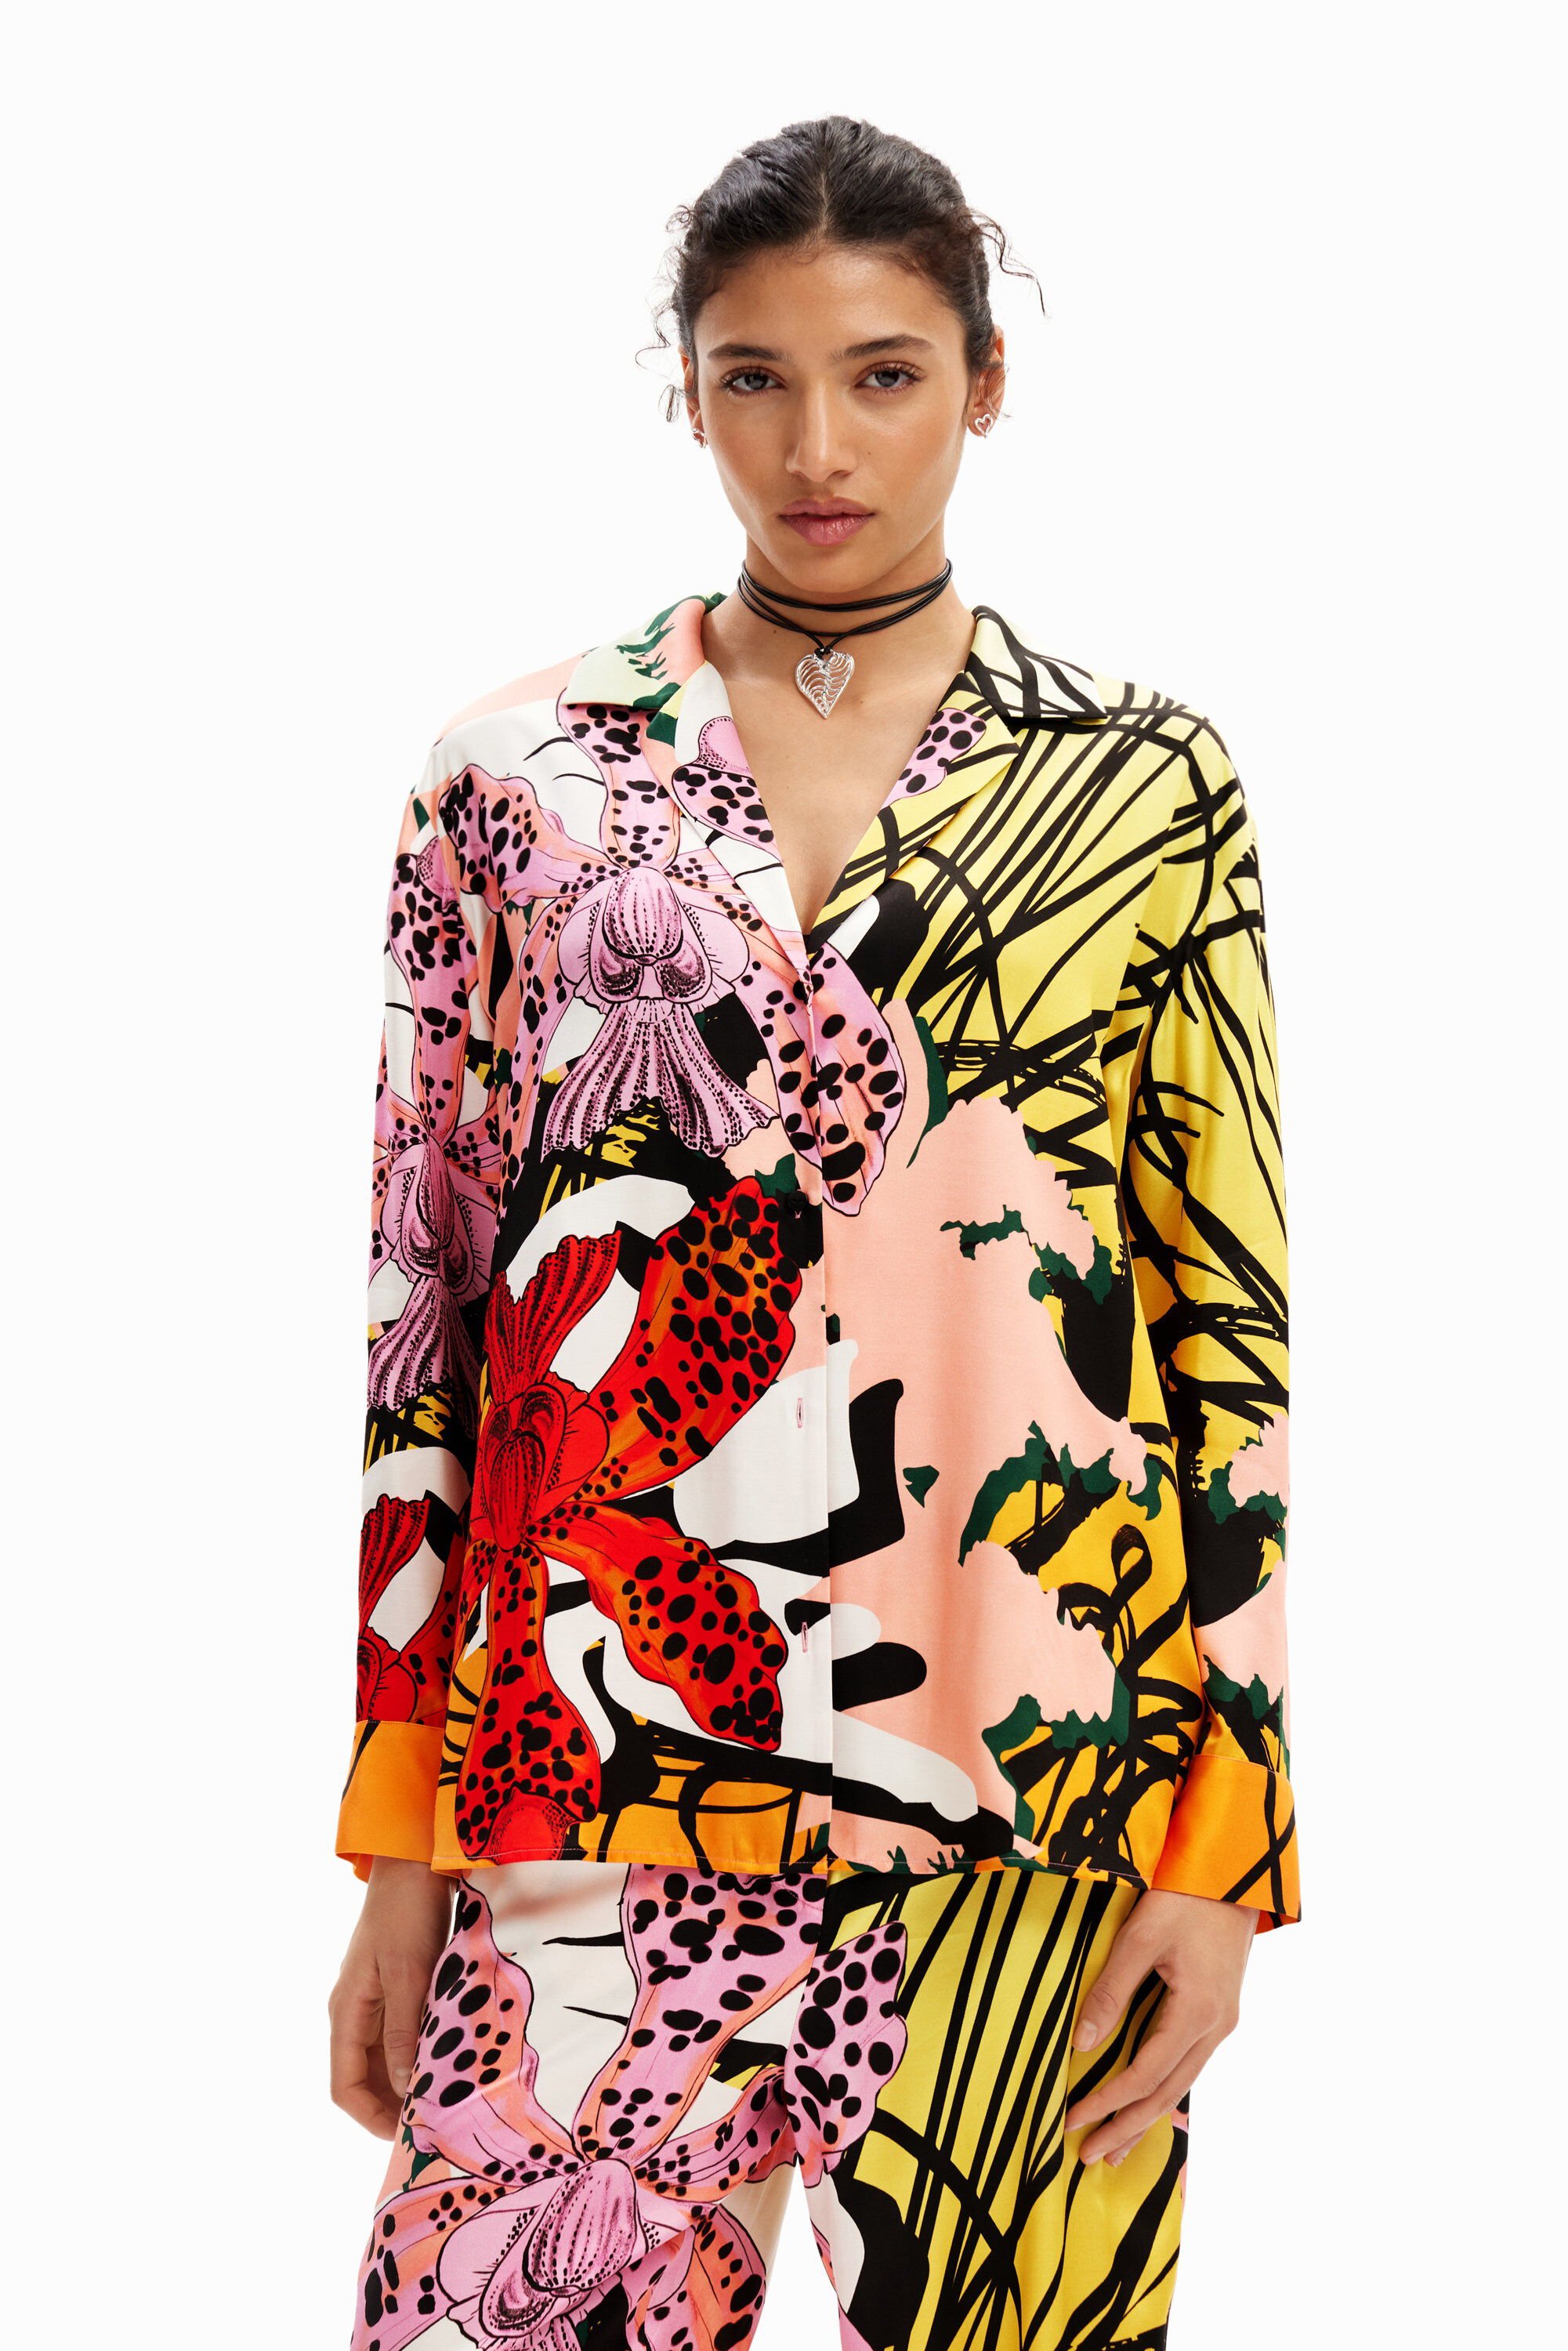 Desigual M. Christian Lacroix Orchid Shirt In Material Finishes